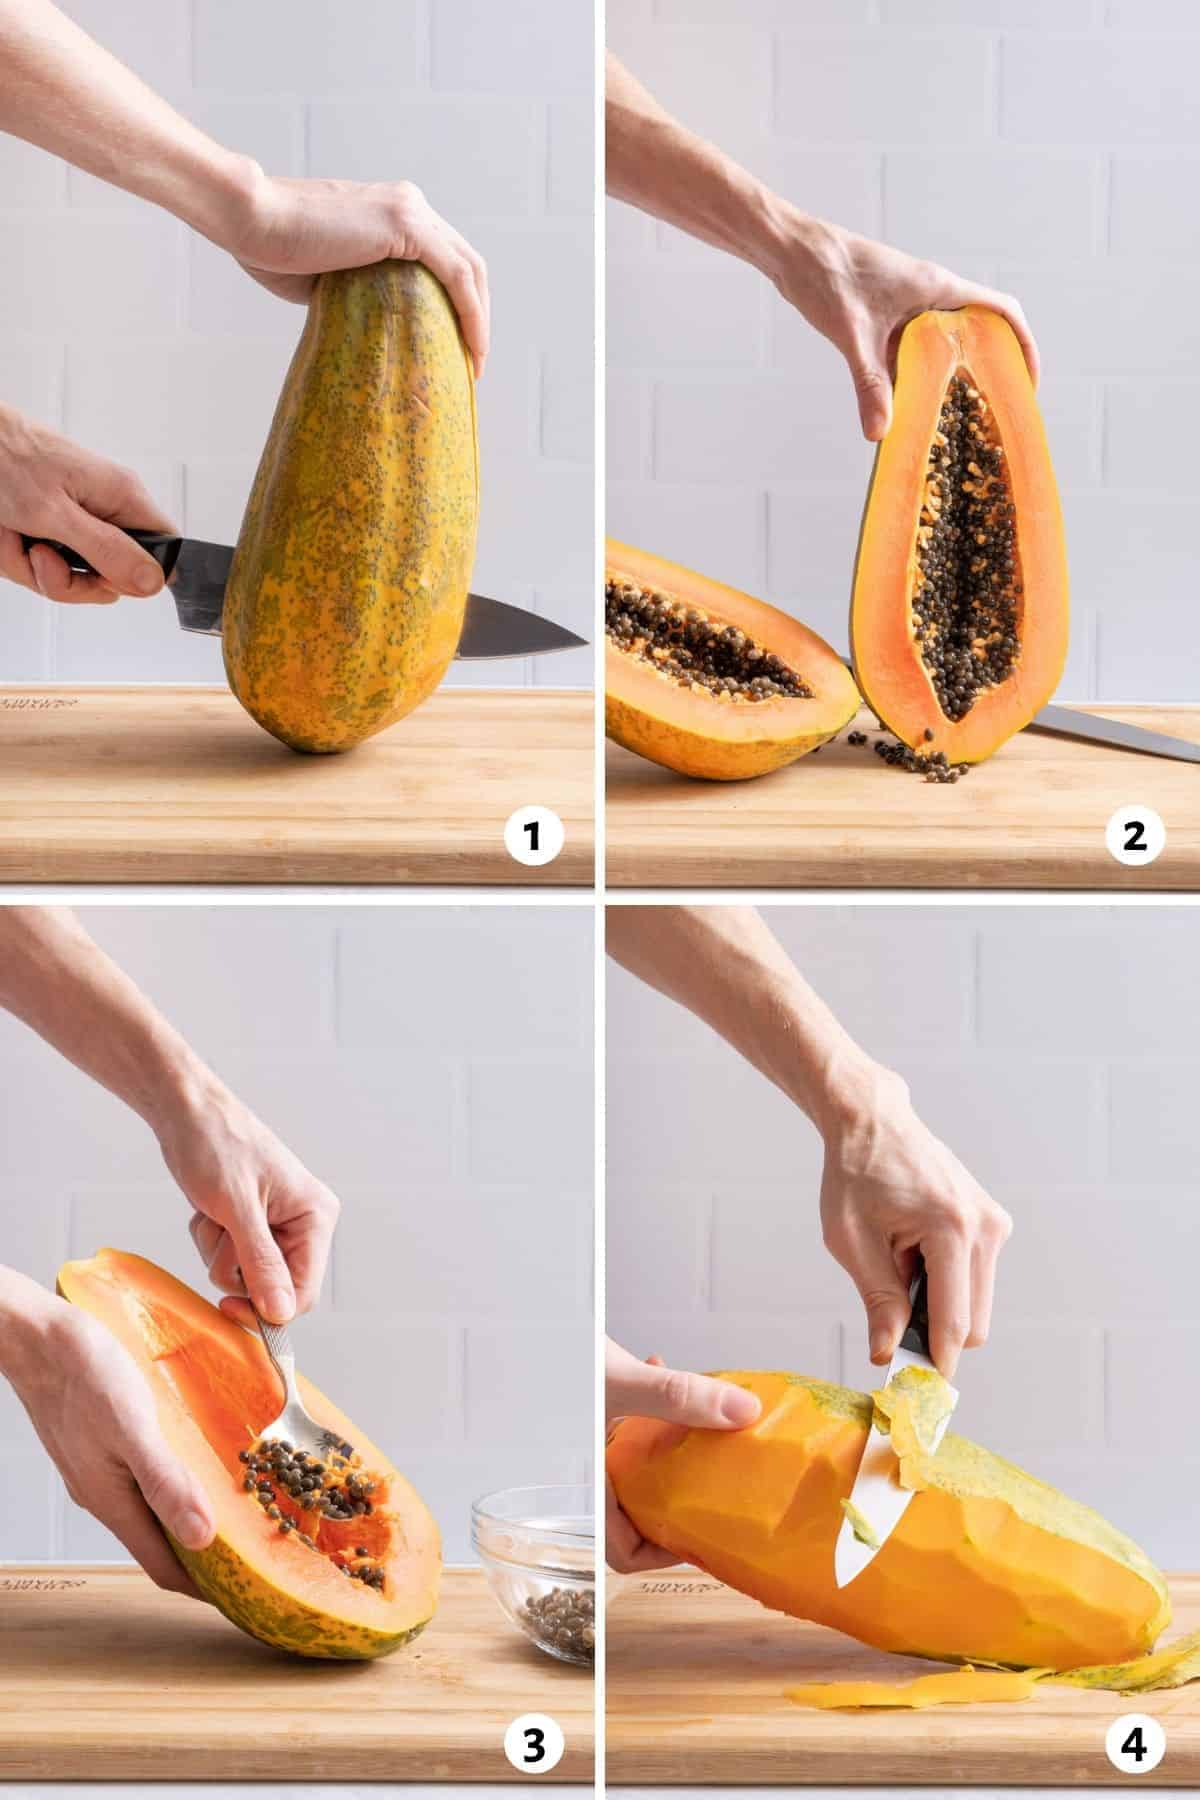 4 image collage to show steps on how to prepare a papaya to cut